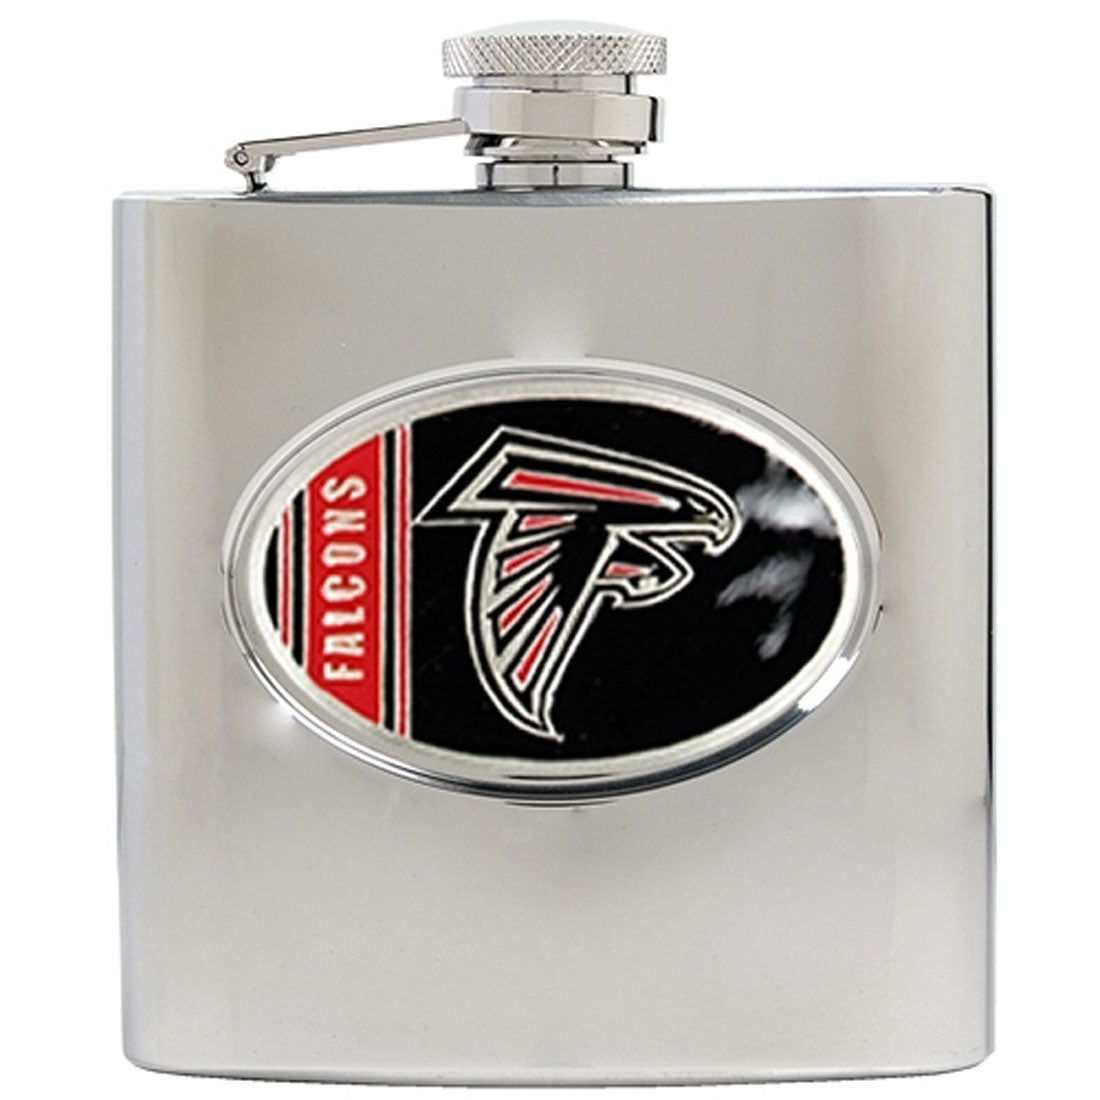 NFL Unisex-Adult Stainless Steel Hip Flask with Metallic Graphics, 6-Ounce, Silver